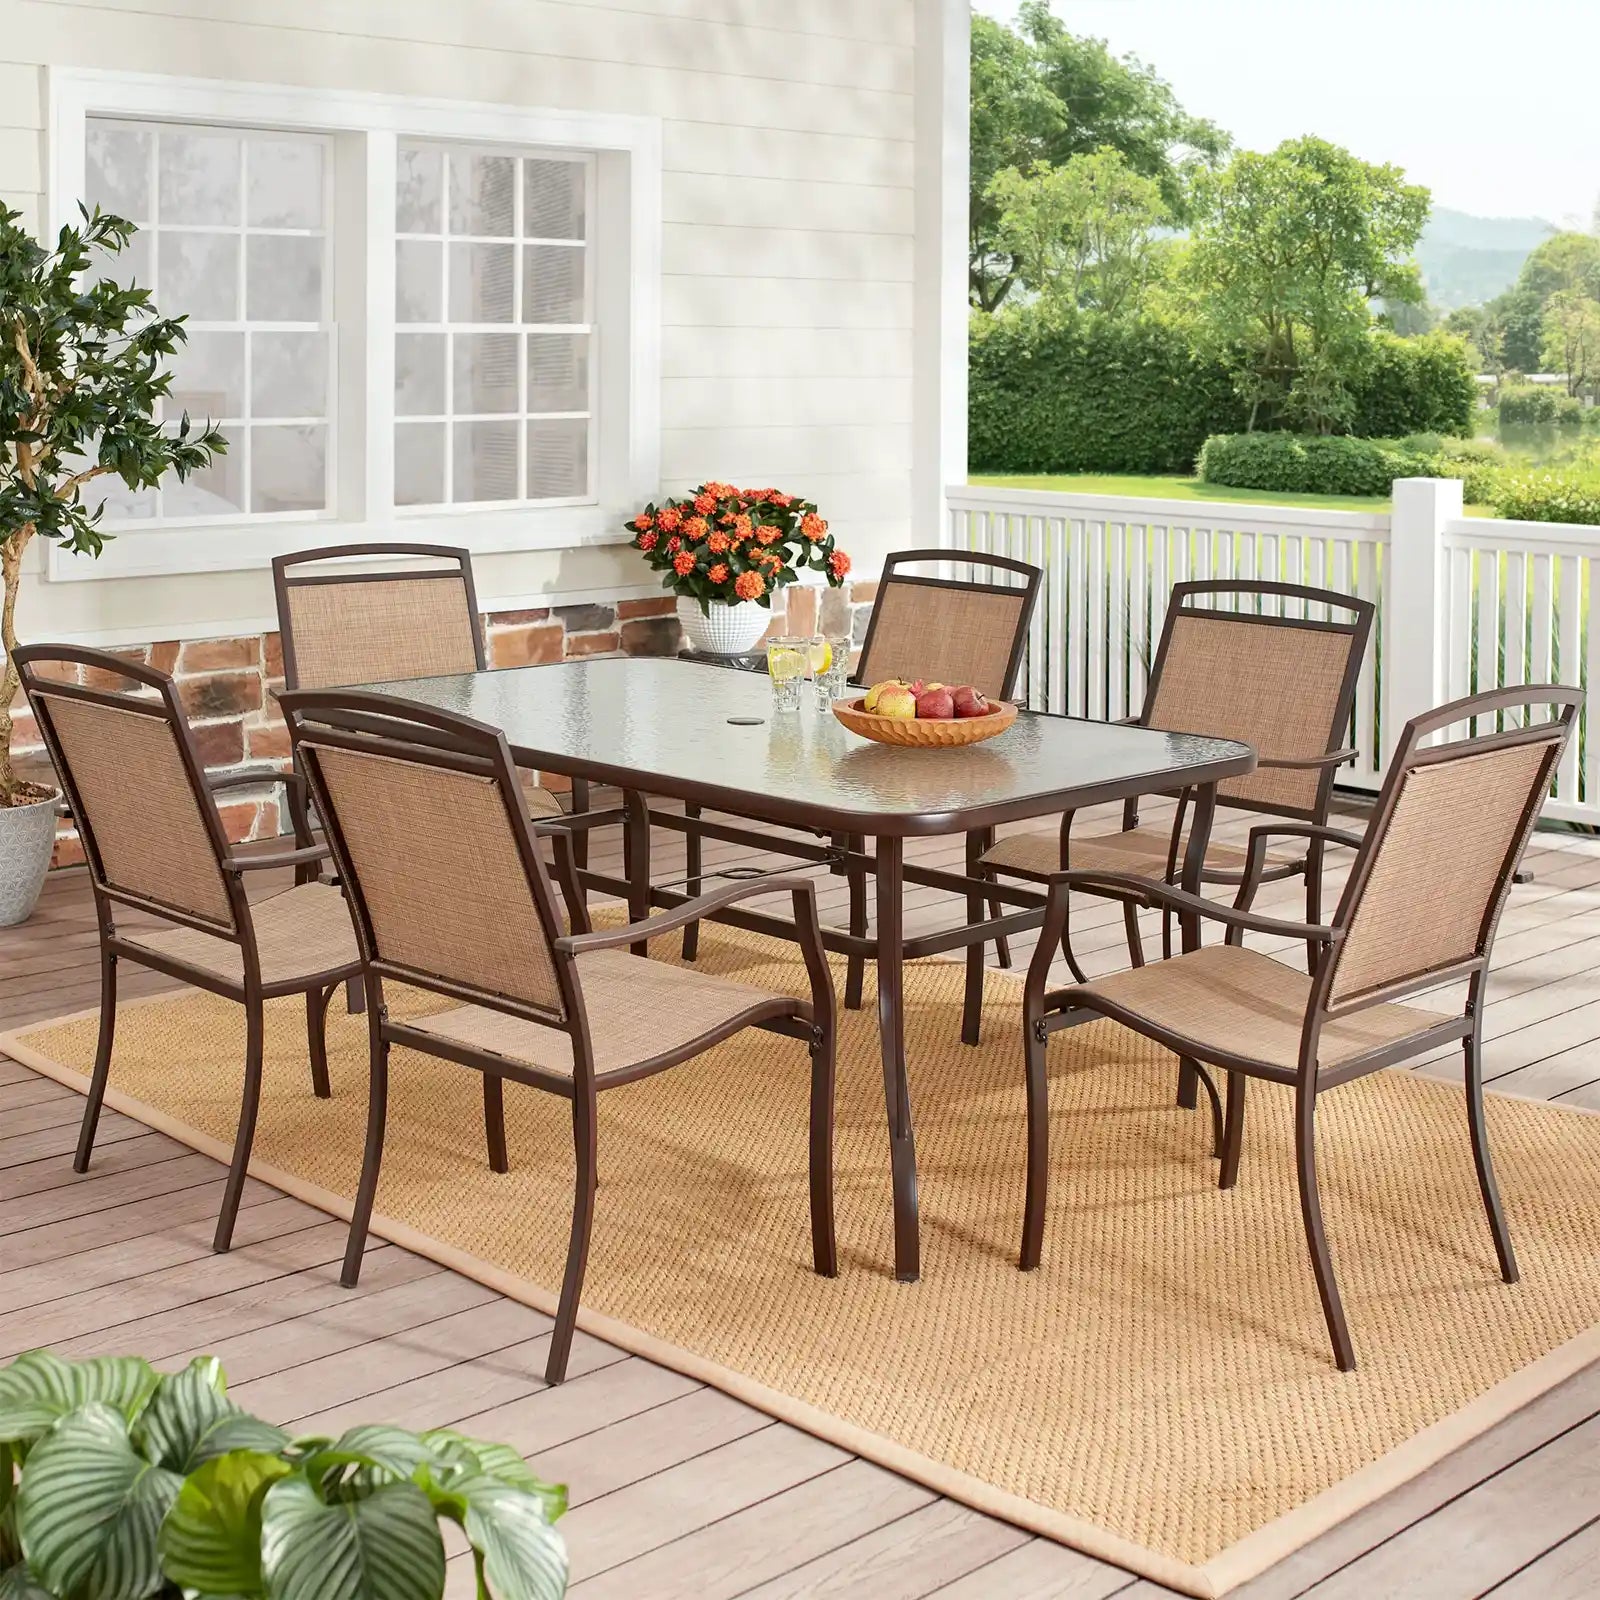 Premium Outdoor Patio Dining Set for Quality Lifestyle